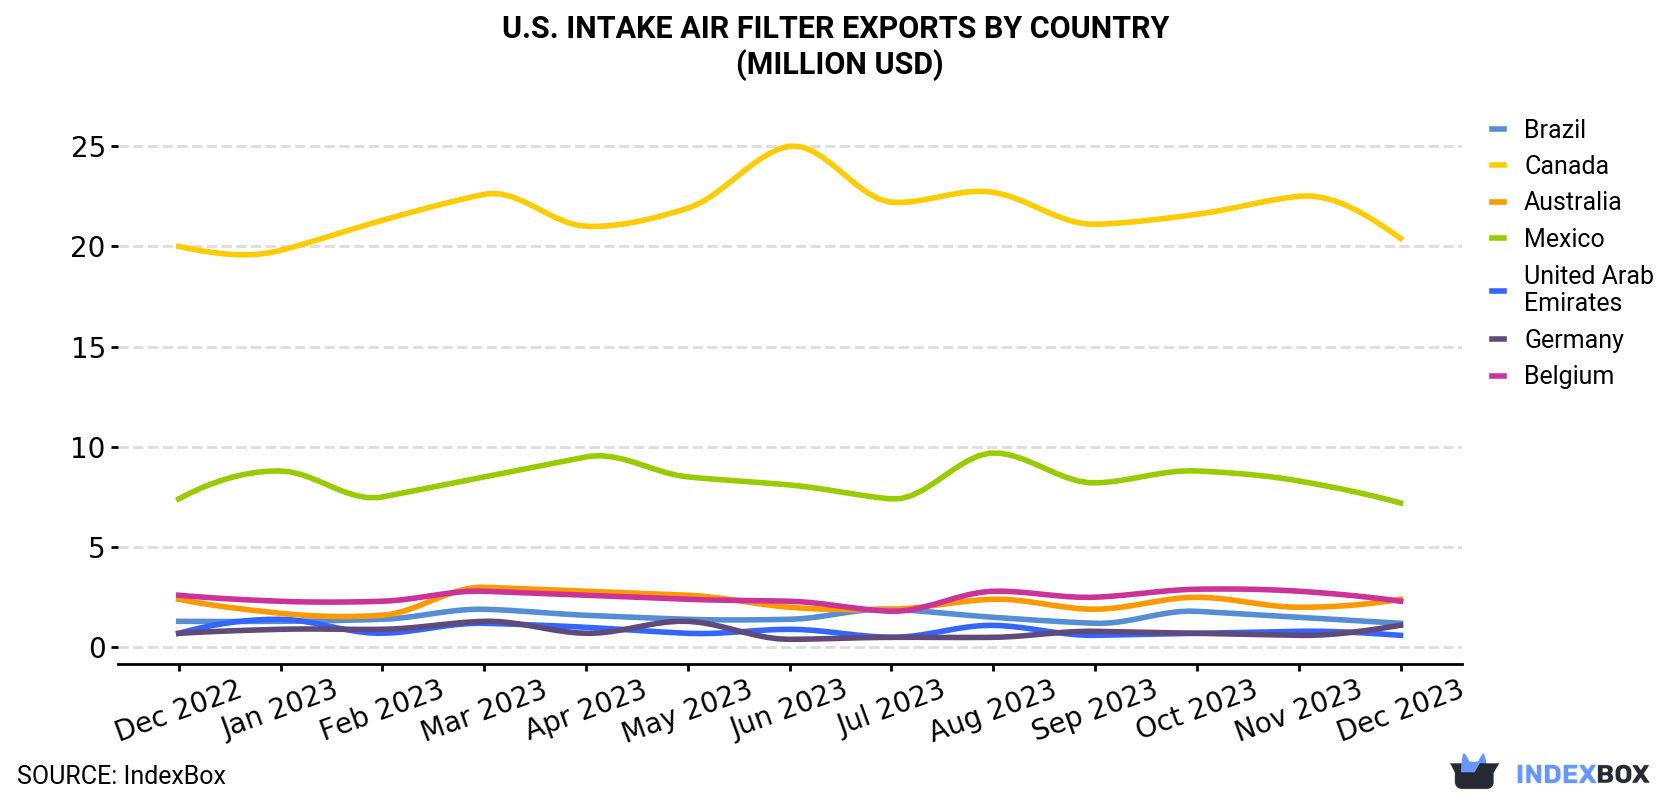 U.S. Intake Air Filter Exports By Country (Million USD)